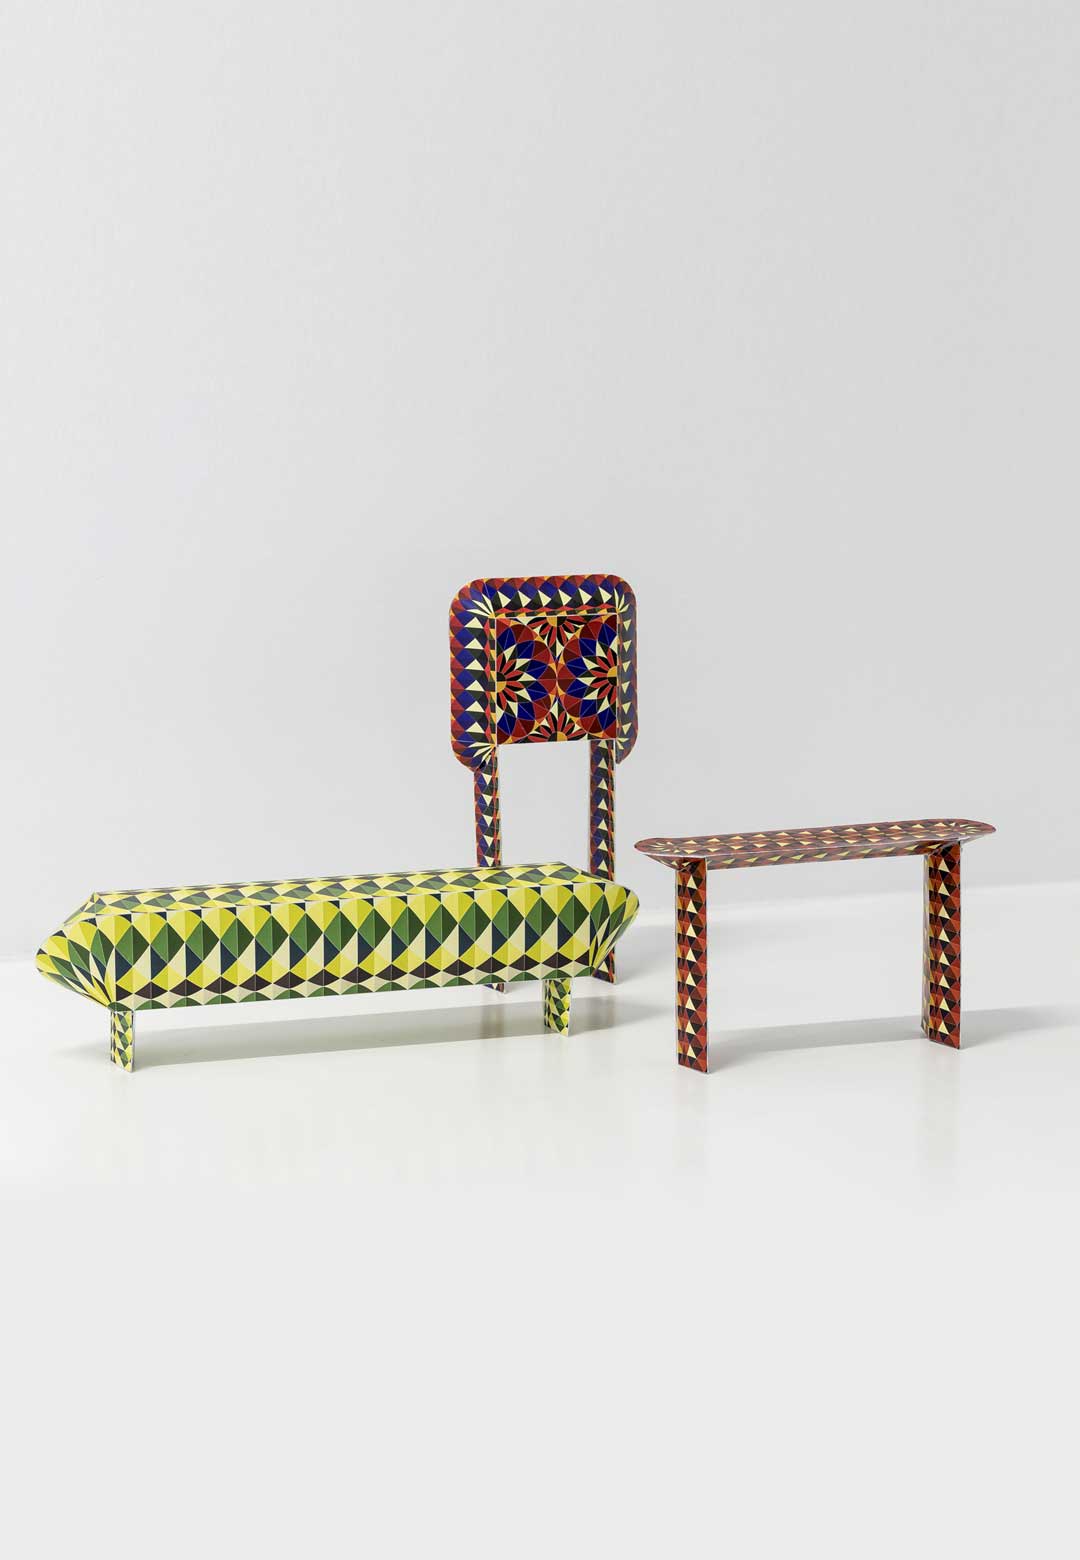 Adam and Arthur's ‘Exquisite Corpse’ uses dyed straws to bring furniture to life